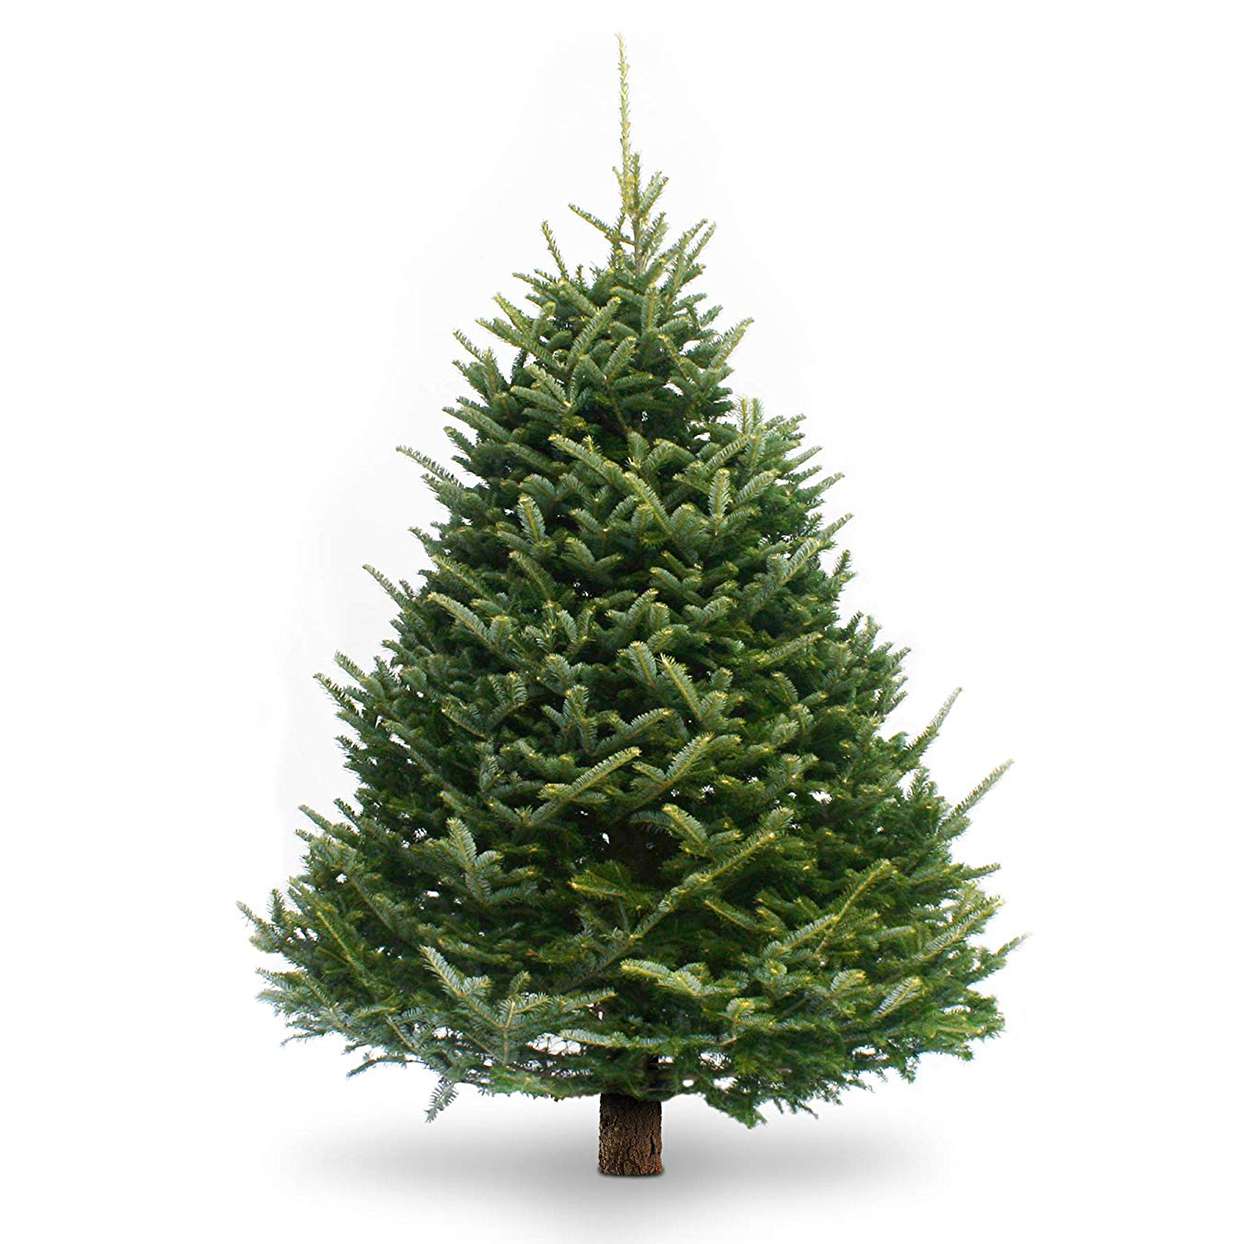 Get A Fresh Christmas Tree Delivered To Your Door This Season